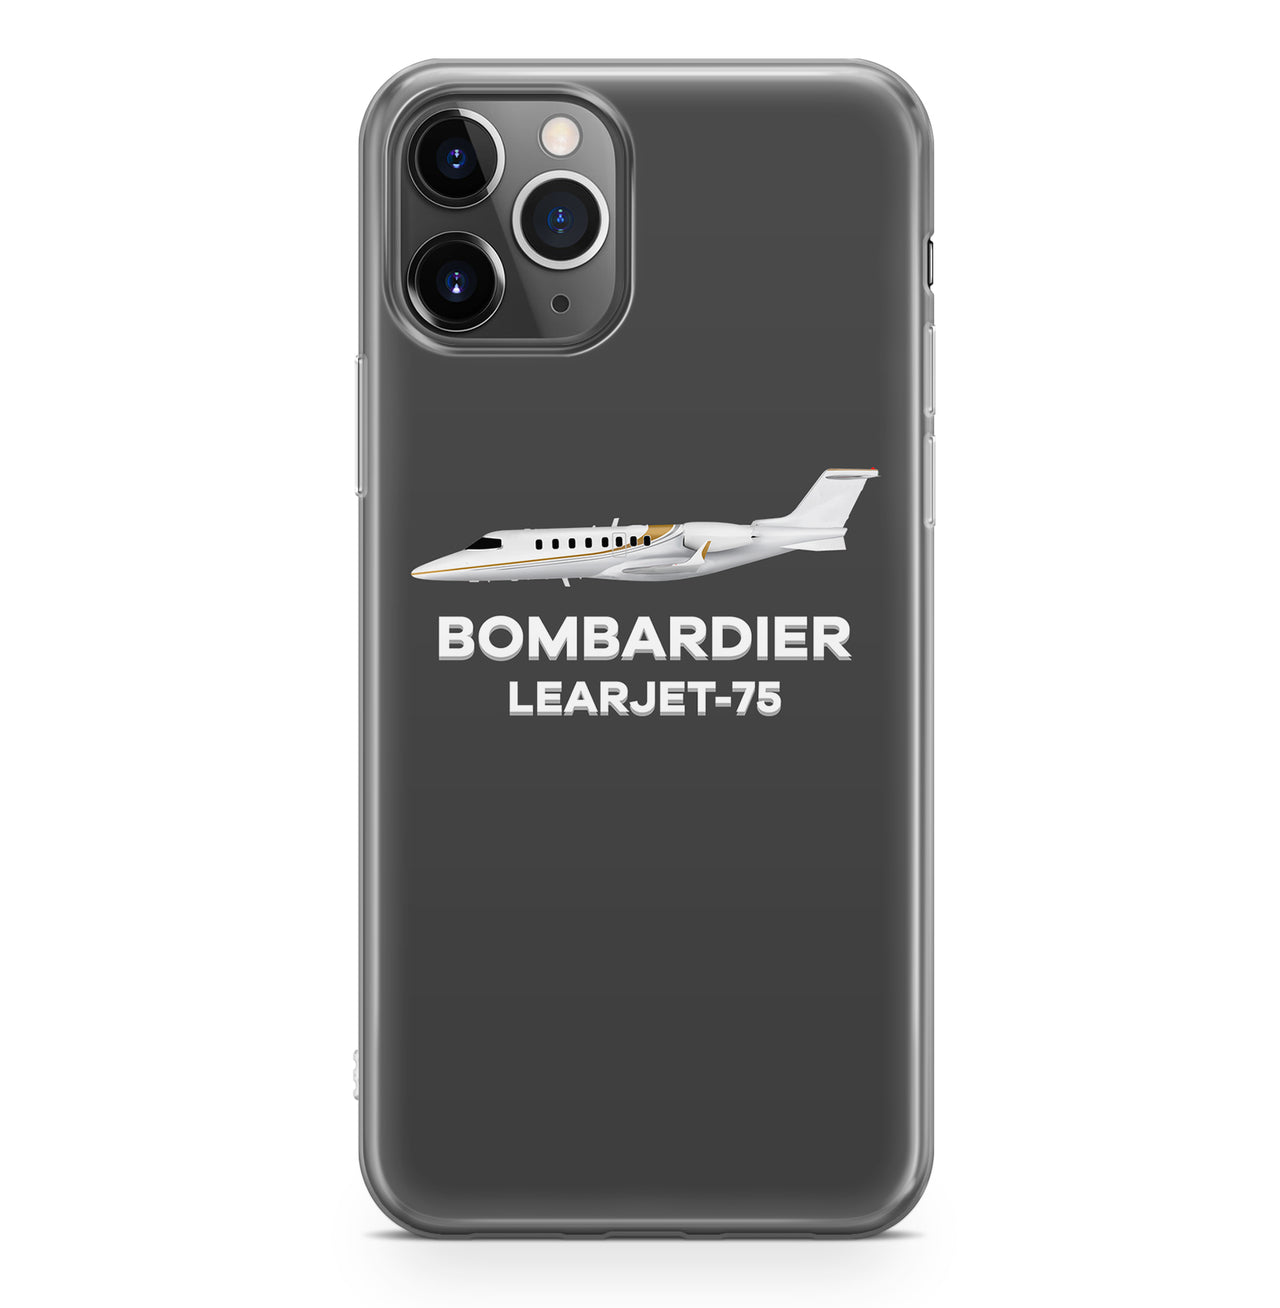 The Bombardier Learjet 75 Designed iPhone Cases